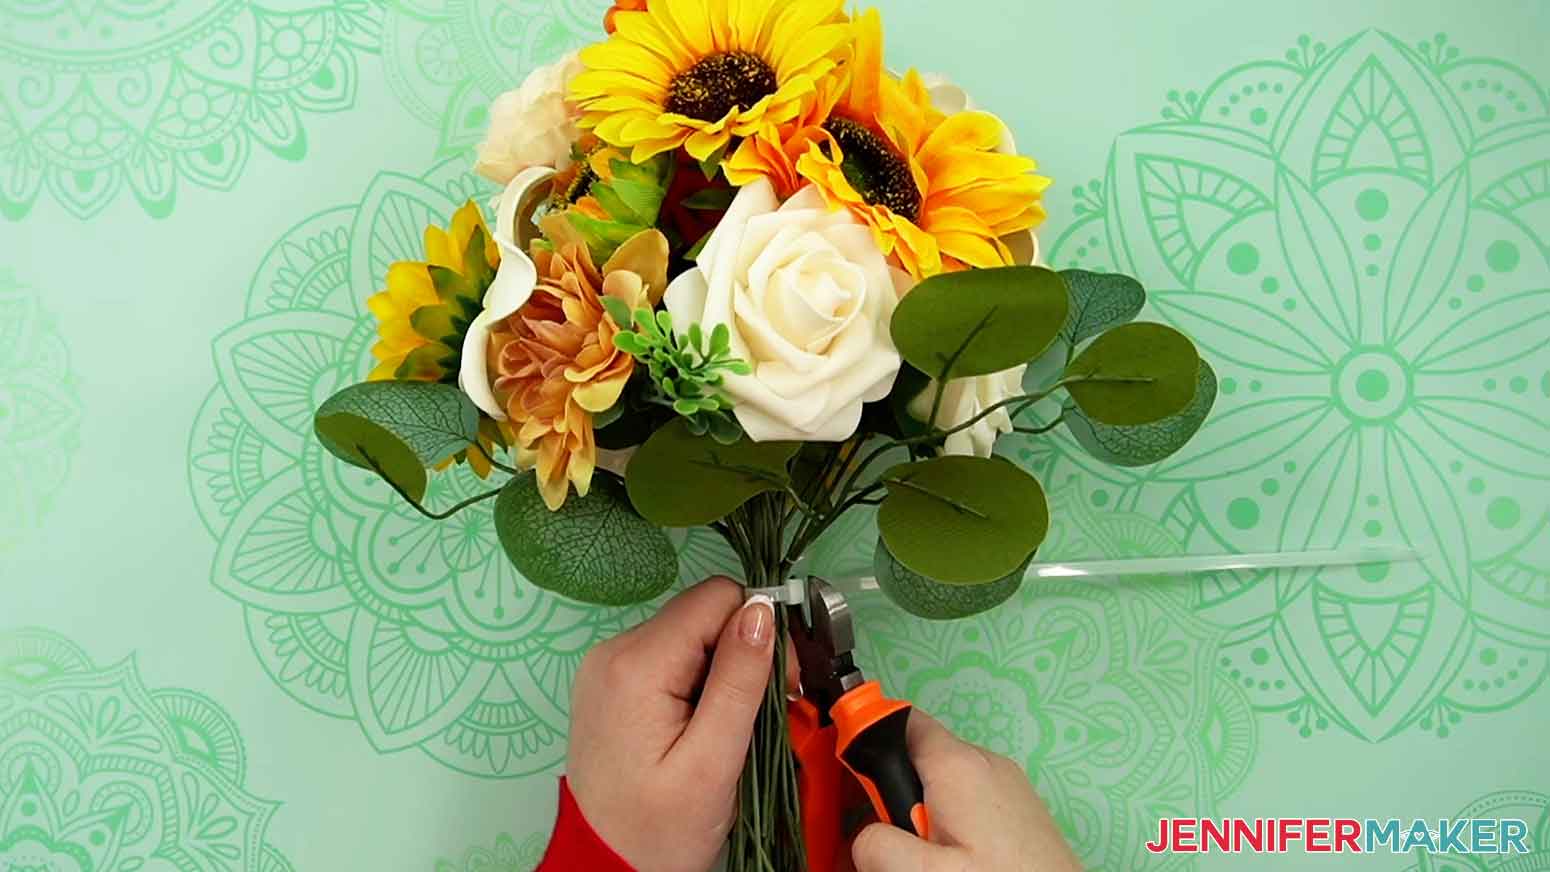 Attach a zip tie to the base of the bouquet to secure the placement of the flowers.